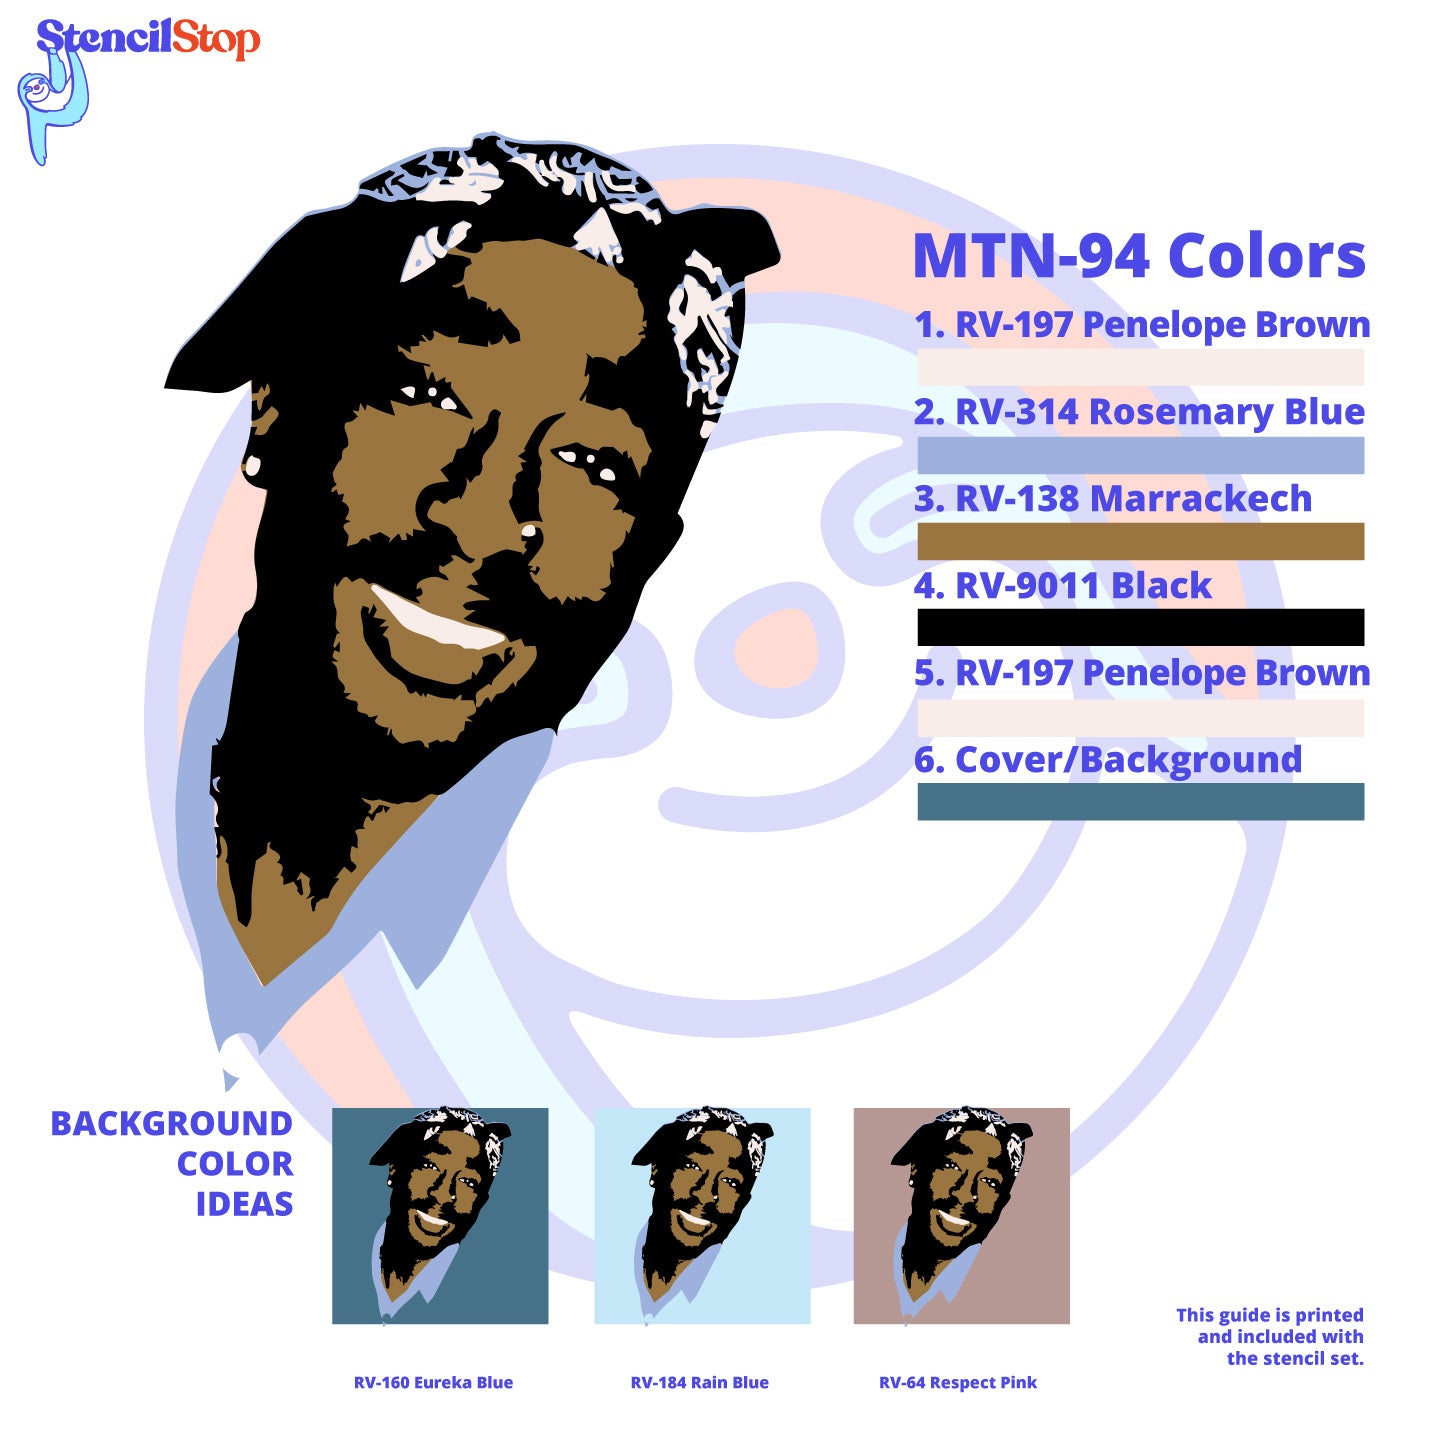 Tupac "With Bandana" Layered Stencil Set Color Guide